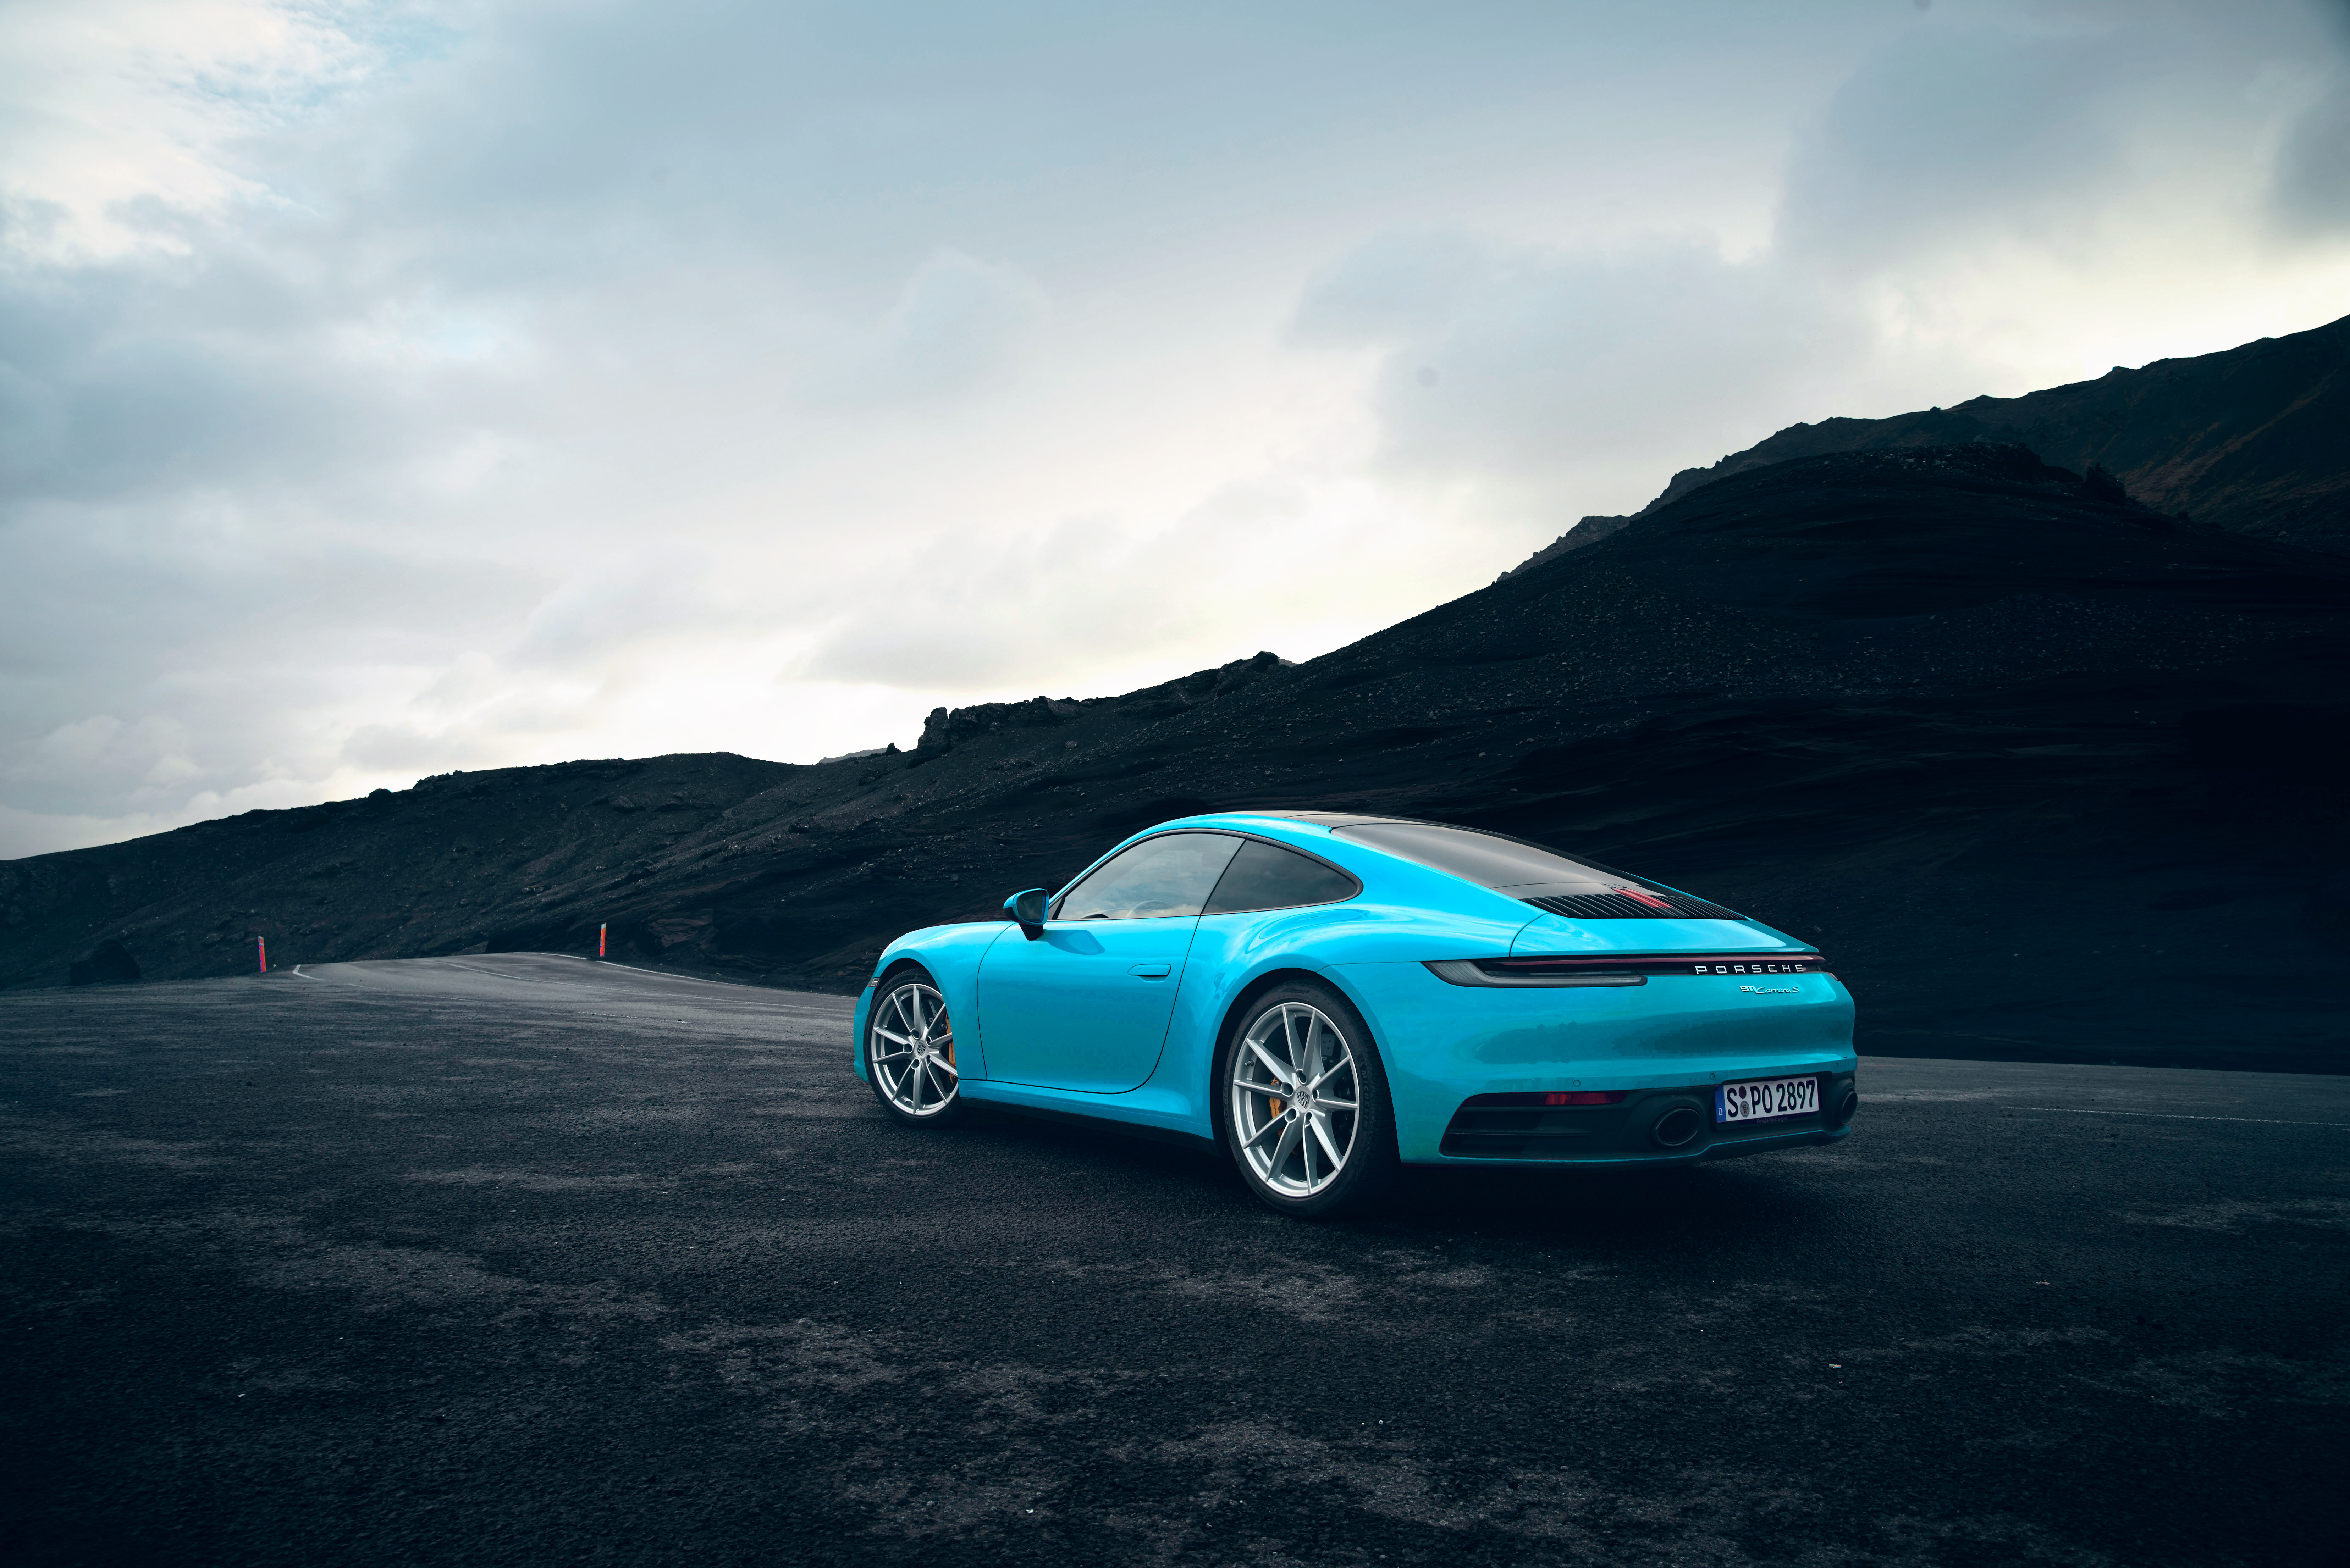 Blue sports car in front of a rocky landscape